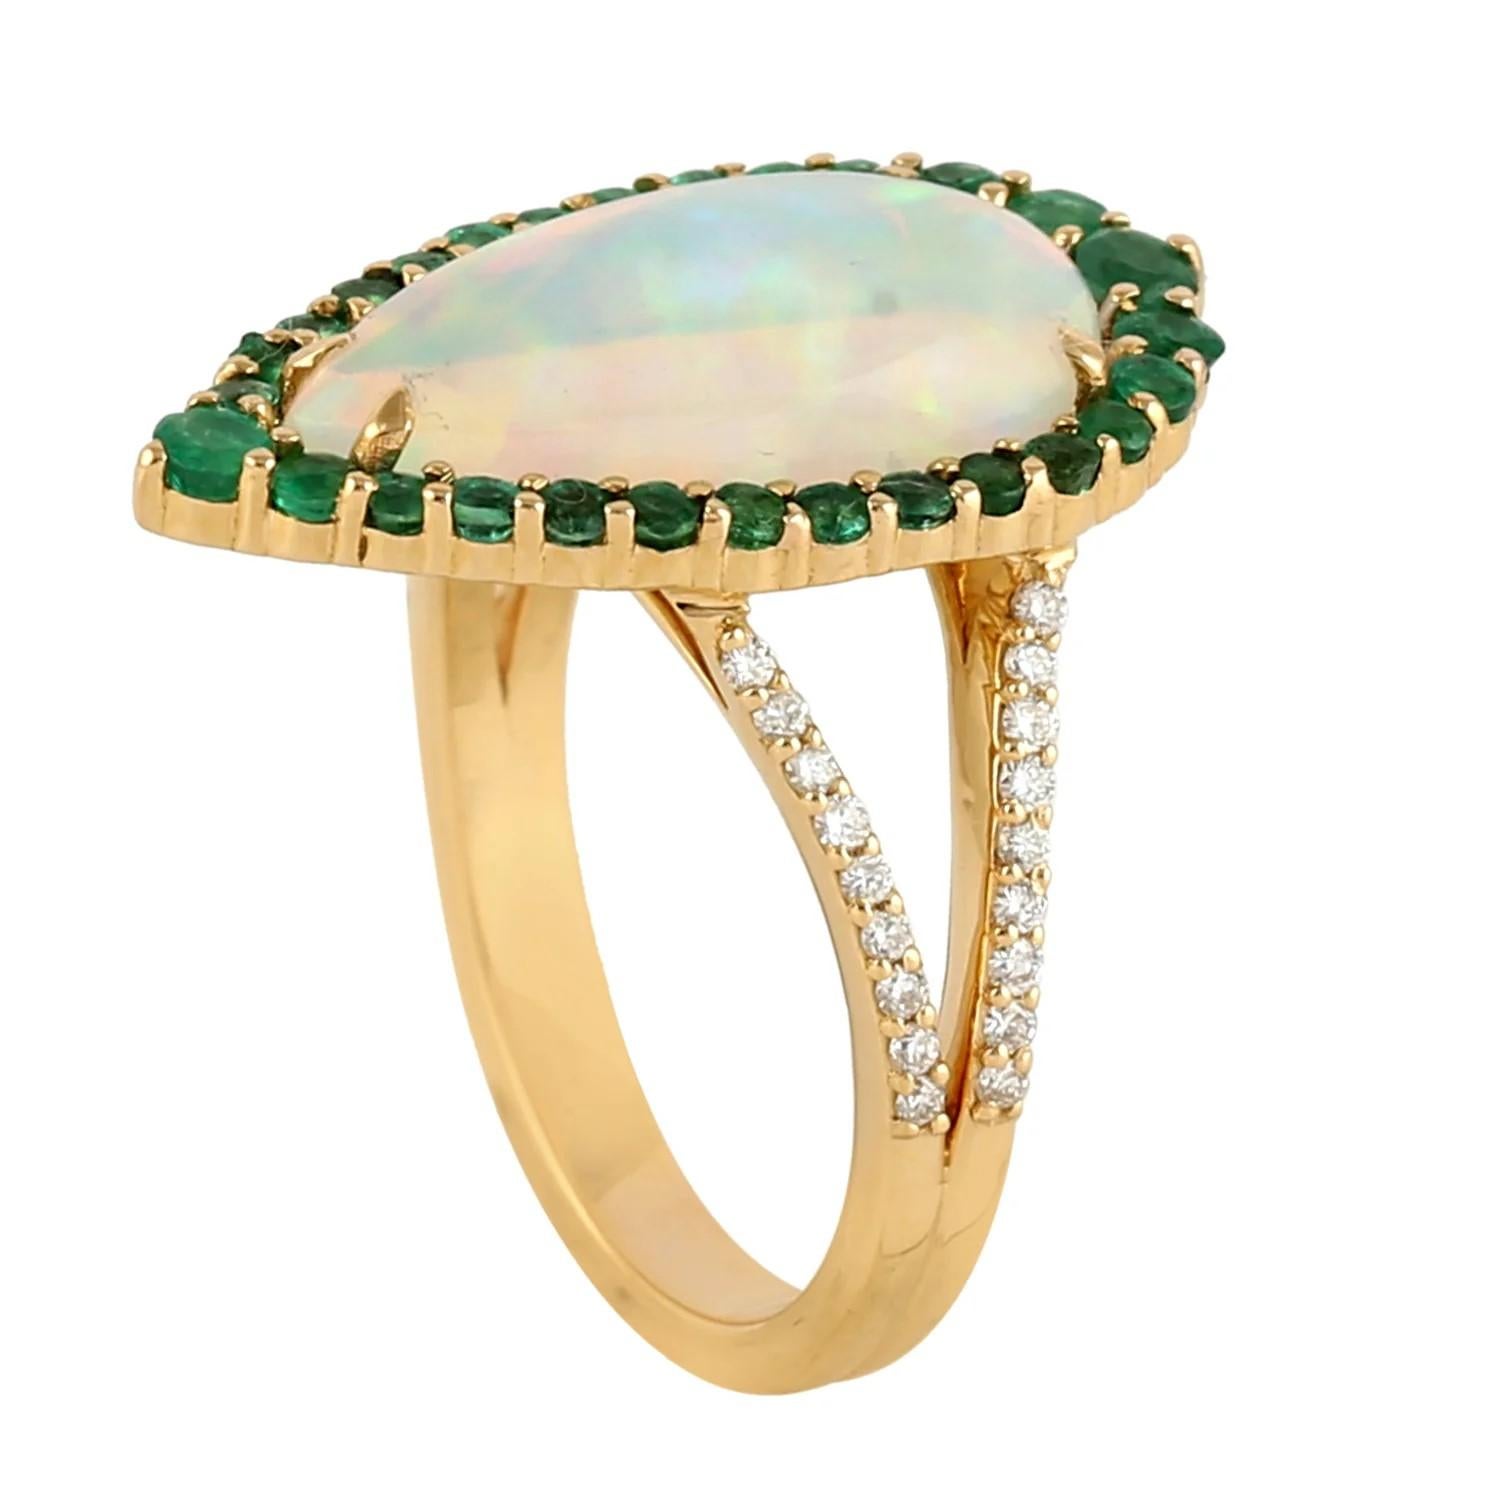 This ring has been meticulously crafted from 14-karat gold.  It is hand set with 3.13 carat Ethiopian opal, .82 carats emerald & .22 carats of sparkling diamonds. 

The ring is a size 7 and may be resized to larger or smaller upon request. 
FOLLOW 